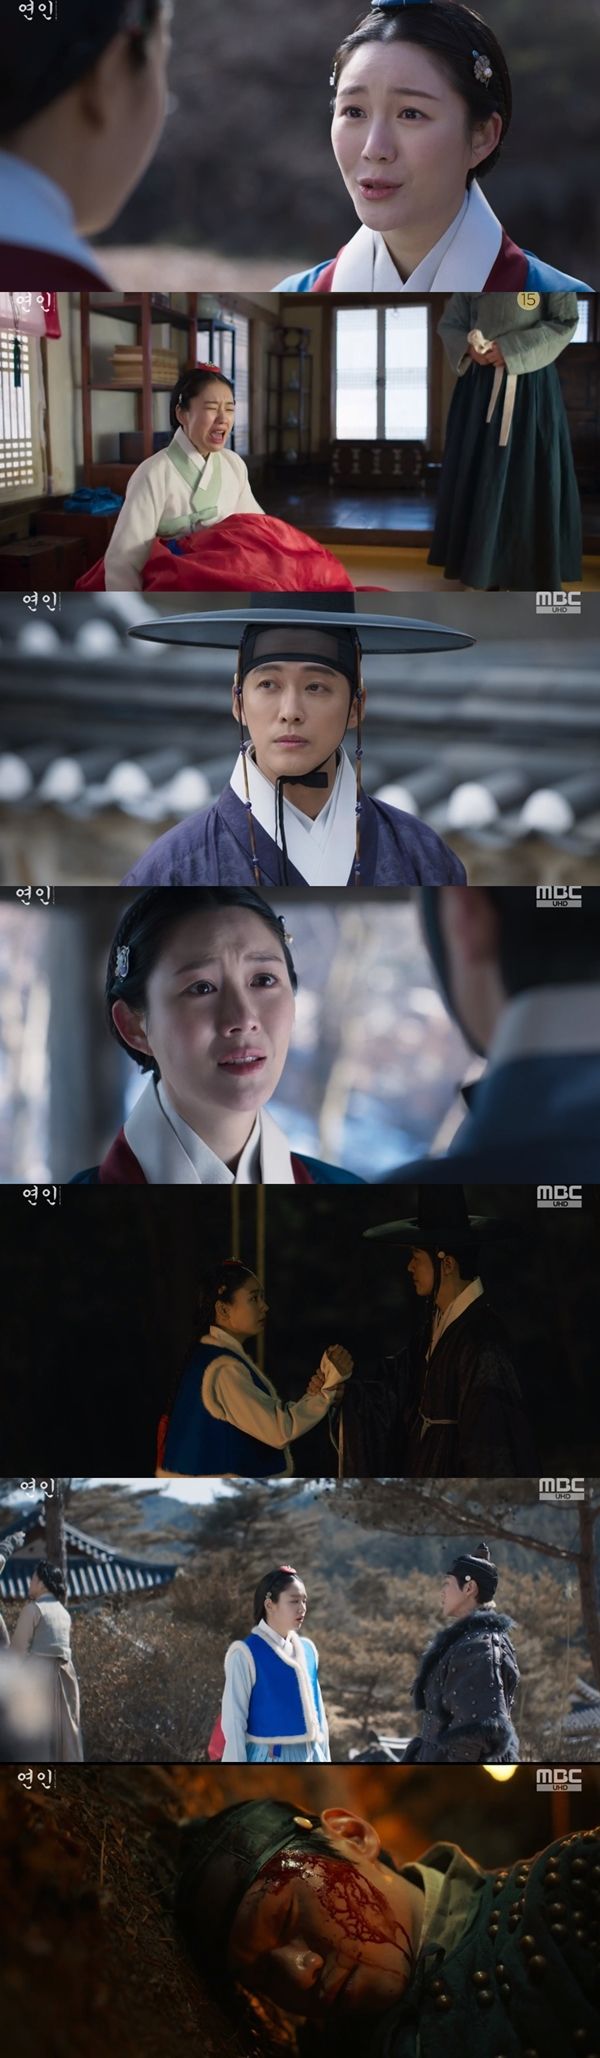 There was an unusual favorable airflow between Couple Namgoong Min and Ahn Eun-jin.MBCs Friday-Saturday drama Couple, which aired on 11th, depicted Yoo Gil-chae (Ahn Eun-jin) agitating Yizhang County (Namgoong Min).On this day, Kyung Eun-ae (Lee Da-in) told Yu Gil-chae that she had promised to make a Wedding Bible with Nam Yeon-joon (Lee Hak-ju).Kyung Eun-ae said, Botchan Nam Yeon-joon decided to join the Wedding Bible with me before he left the army. Youre right. Its all thanks to you.Yu Gil-chae was upset and cried, Why on earth is Eun Ae? I told you not to go to war, but who told you to post the Wedding Bible? Why is it Eun Ae, not me?Botchan has no idea that Im going to be someone elses partner. If I say Im going to be someone elses wife, hell realize how he feels, she said.Afterwards, Yu Gil-chae received Confessions of Soon Yak Do-ryeong in front of Nam Yeon-joon, who was pleased to see Nam Yeon-joons face looking at Jasin.Yizhang County said to Yu Gil-chae, Can you turn Nam Yeon-joons heart? I am a man who is bright in calculations. There will be no Jasin to handle a disreputable GLOW like you.I will not be able to bear it because I am weak. Yu Gil - chae, who was returning home with a fuss, met Kyung Eun Ae. Kyung Eun Ae proposed a joint Wedding Bible to Yu Gil - chae, and Nam Yeon - joon agreed and hurt Yu Gil - chae s heart.Yizhang County decided to help Yu Gil-chae, who had an unwanted marriage. Yizhang County, who collected men who were about to leave the war, such as Nam Yeon-joon, said, It is not a good idea to postpone the Wedding Bible for a while.The life of the husband who lost his wife continues, but the life of the wife who lost her husband stops. Yu Gil-chae, who was not allowed to do the Wedding Bible as a base in Yizhang County, said, If I am lucky enough to come back alive, then give me your precious lips.When Yu Gil-chae tried to slap him again, Yizhang County said, Yes, thats right. If you meet a barbarian after we leave, kick him like this.The next day, the men appeared in front of the villagers before appearing on the battlefield. Yizhang County also appeared in a poised position.During the last greeting, Kyung Eun Ae told Yu Gil-chae, Is not there something to give to Jang Hyun Botchan? Yu Gil-chae tried to avoid the place, saying, There is nothing to give to Pinanes stone.However, Yizhang County handed Jasins dagger and said, If there is smoke rising over the mountain, go to Pinane. If you go alone, go to Pinane. I do not care about others.Feeling the unspoken emotion, Yu Gil-chae was slightly shaken.Yu Gil-chae, who was seeing him here, was surprised to find that Yizhang County blocked the Wedding Bible and Jasin looked at Yizhang County when he heard the war.The men who appeared on the battlefield were taken by surprise. In a sudden attack, Nam Yeon-joon panicked and was hit in the head by a weapon wielded by the enemy. He bled and fell unconscious.Yizhang County, who heard the news that he had been crushed, found out that the Mongols were among the raided enemies and worried about the GLOW left in the village.